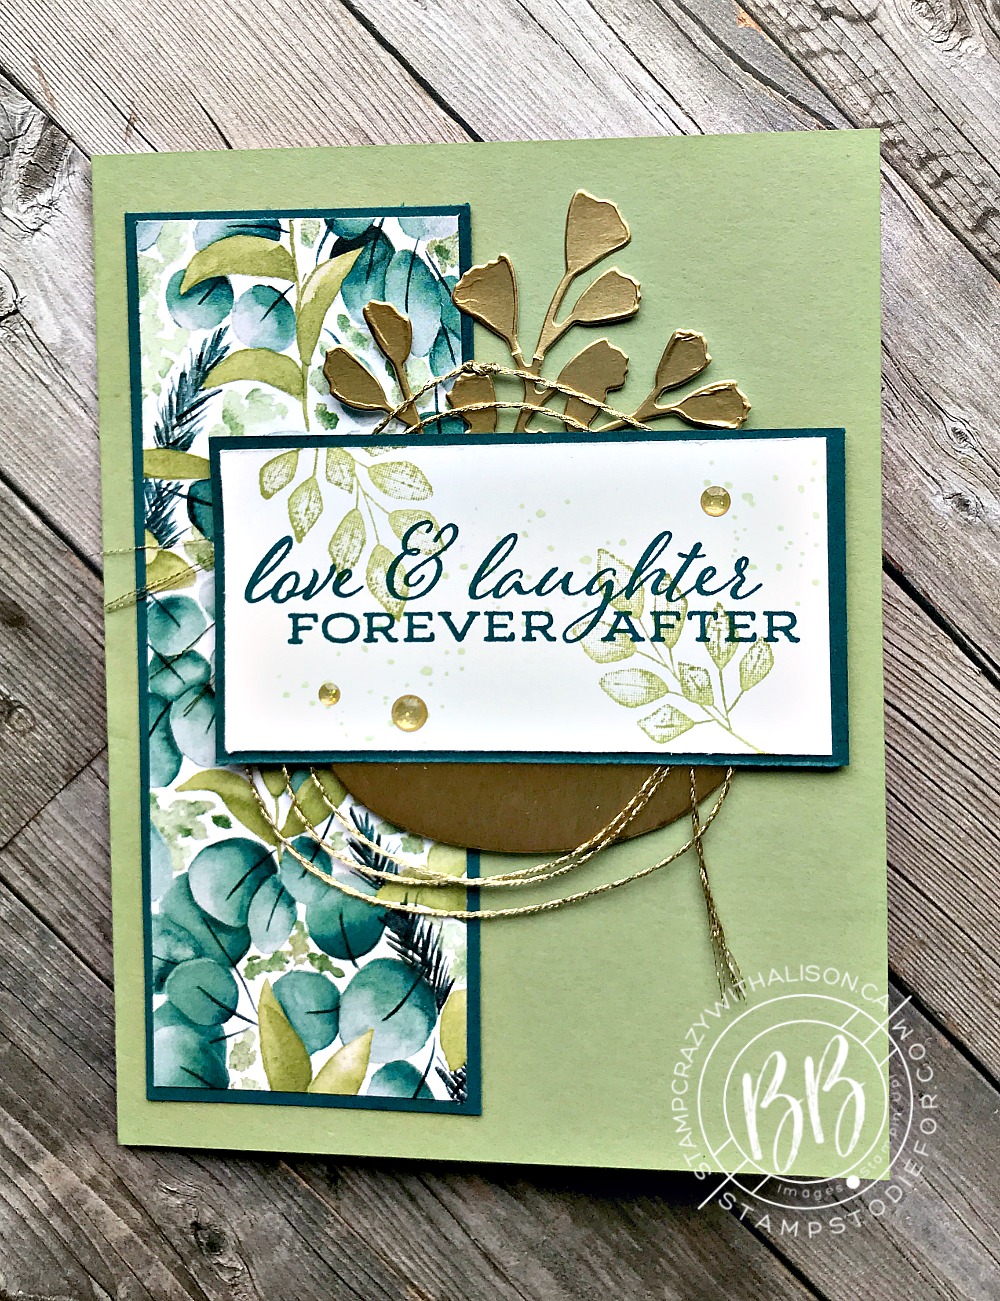 Sunday Sketches with Forever Greenery Suite from Stampin’ Up!®